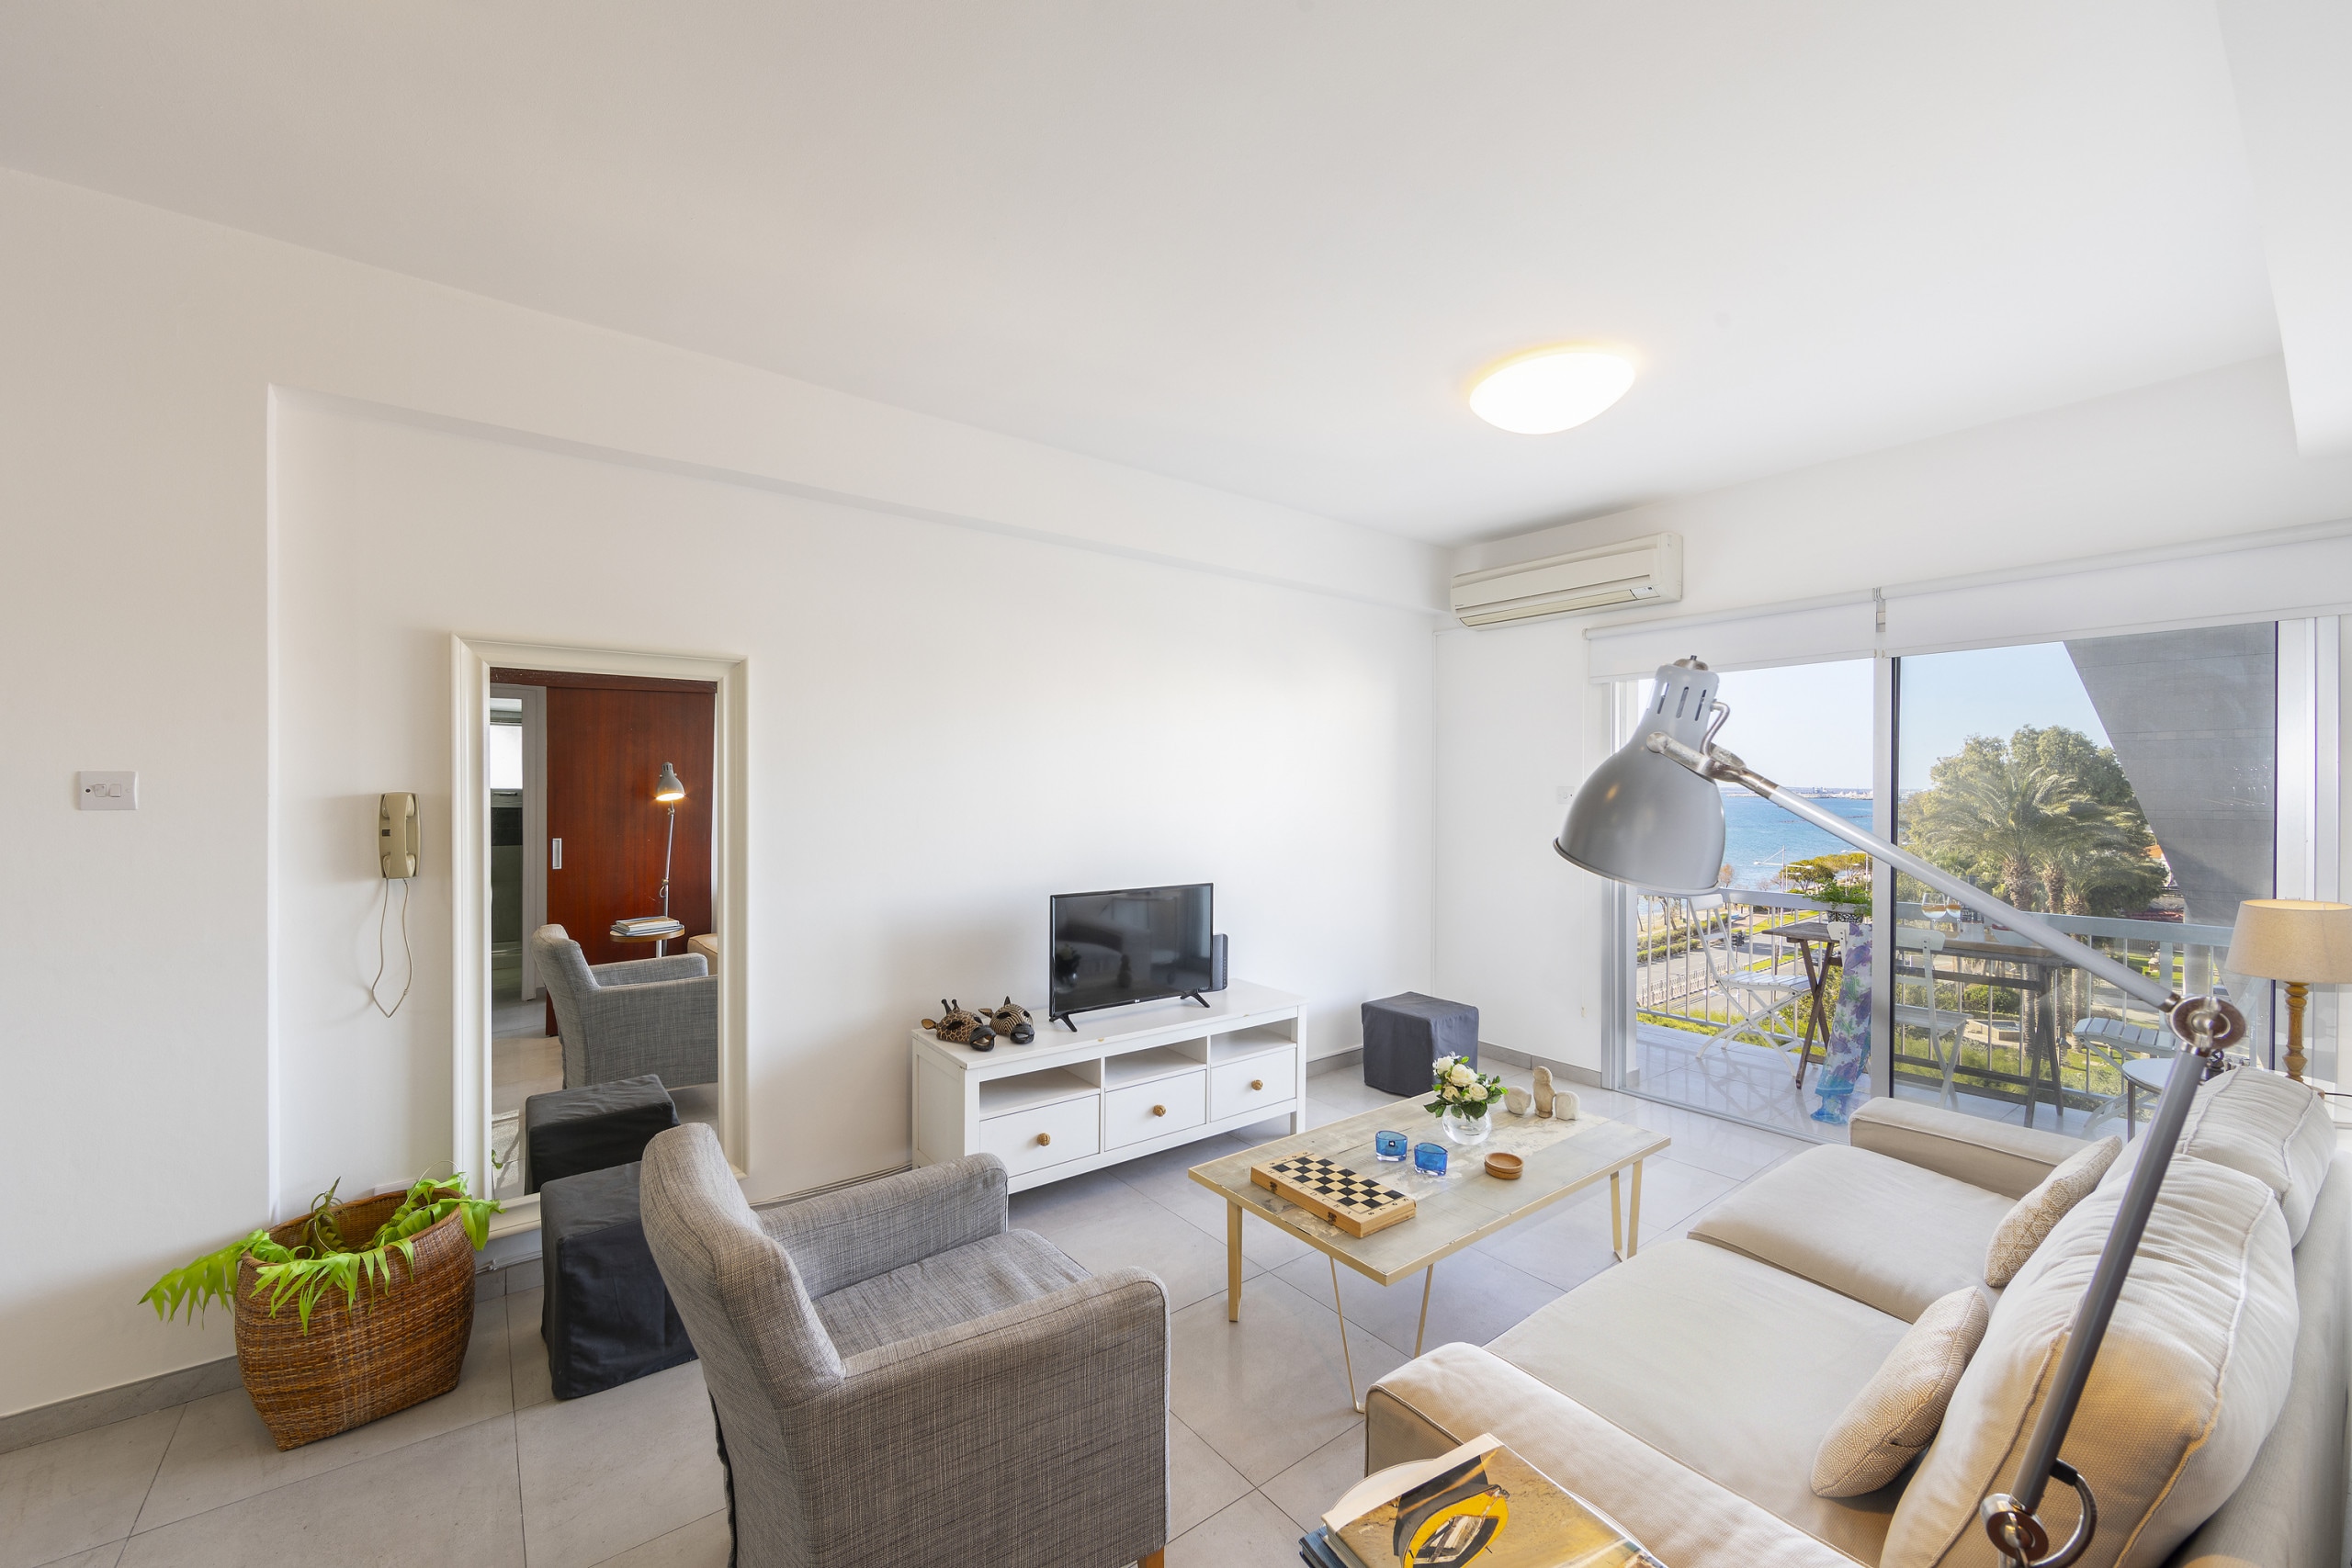 Property Image 1 - Light Filled Homey Flat with Nice Sea View from Balcony